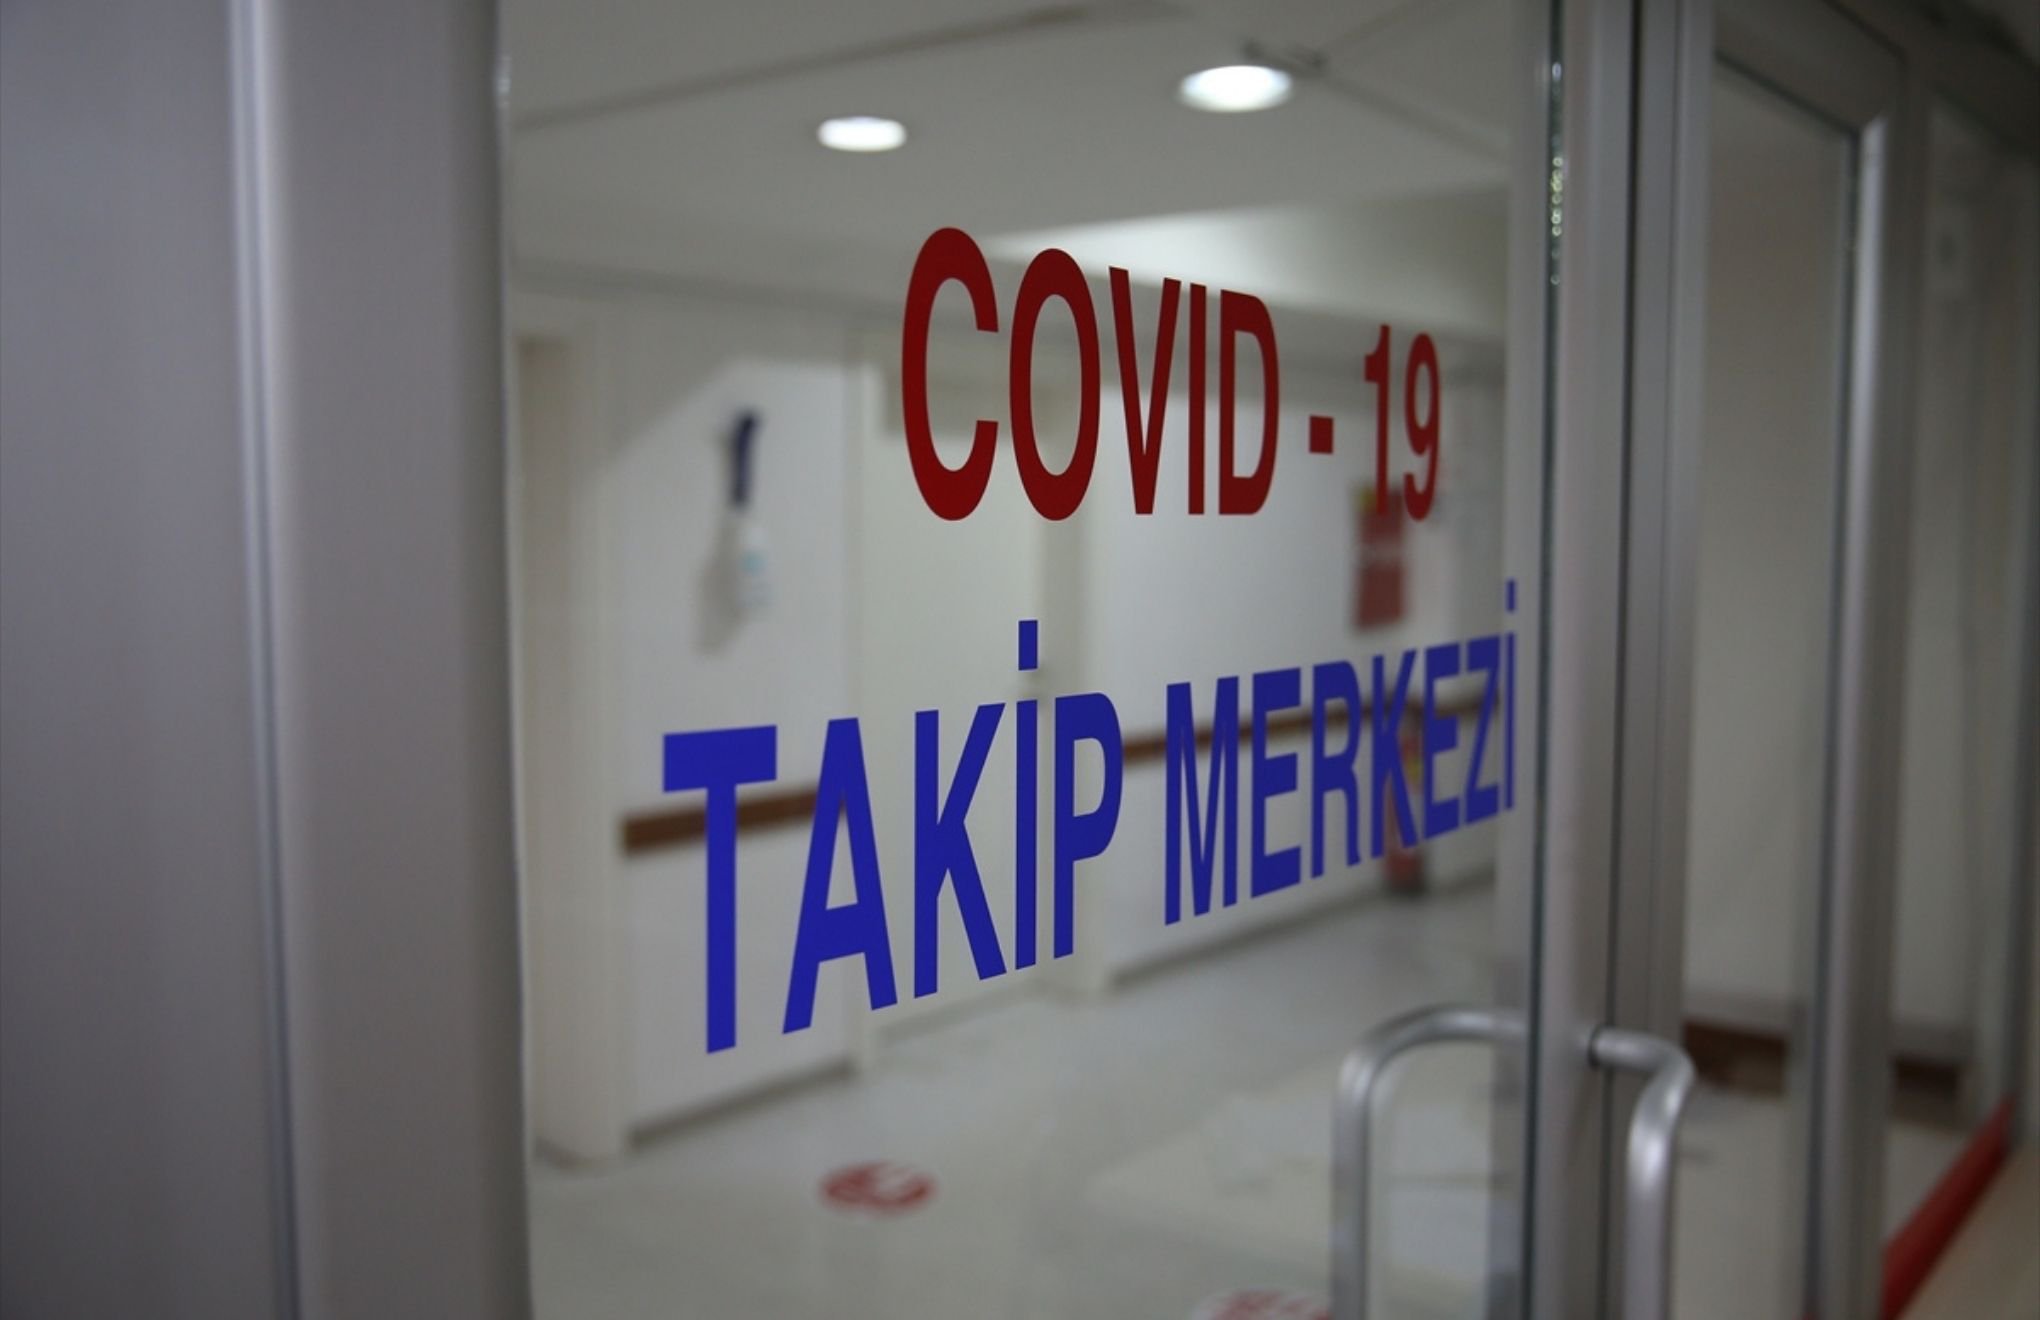 COVID-19 in Turkey | Over 90 thousand daily cases, 258 deaths